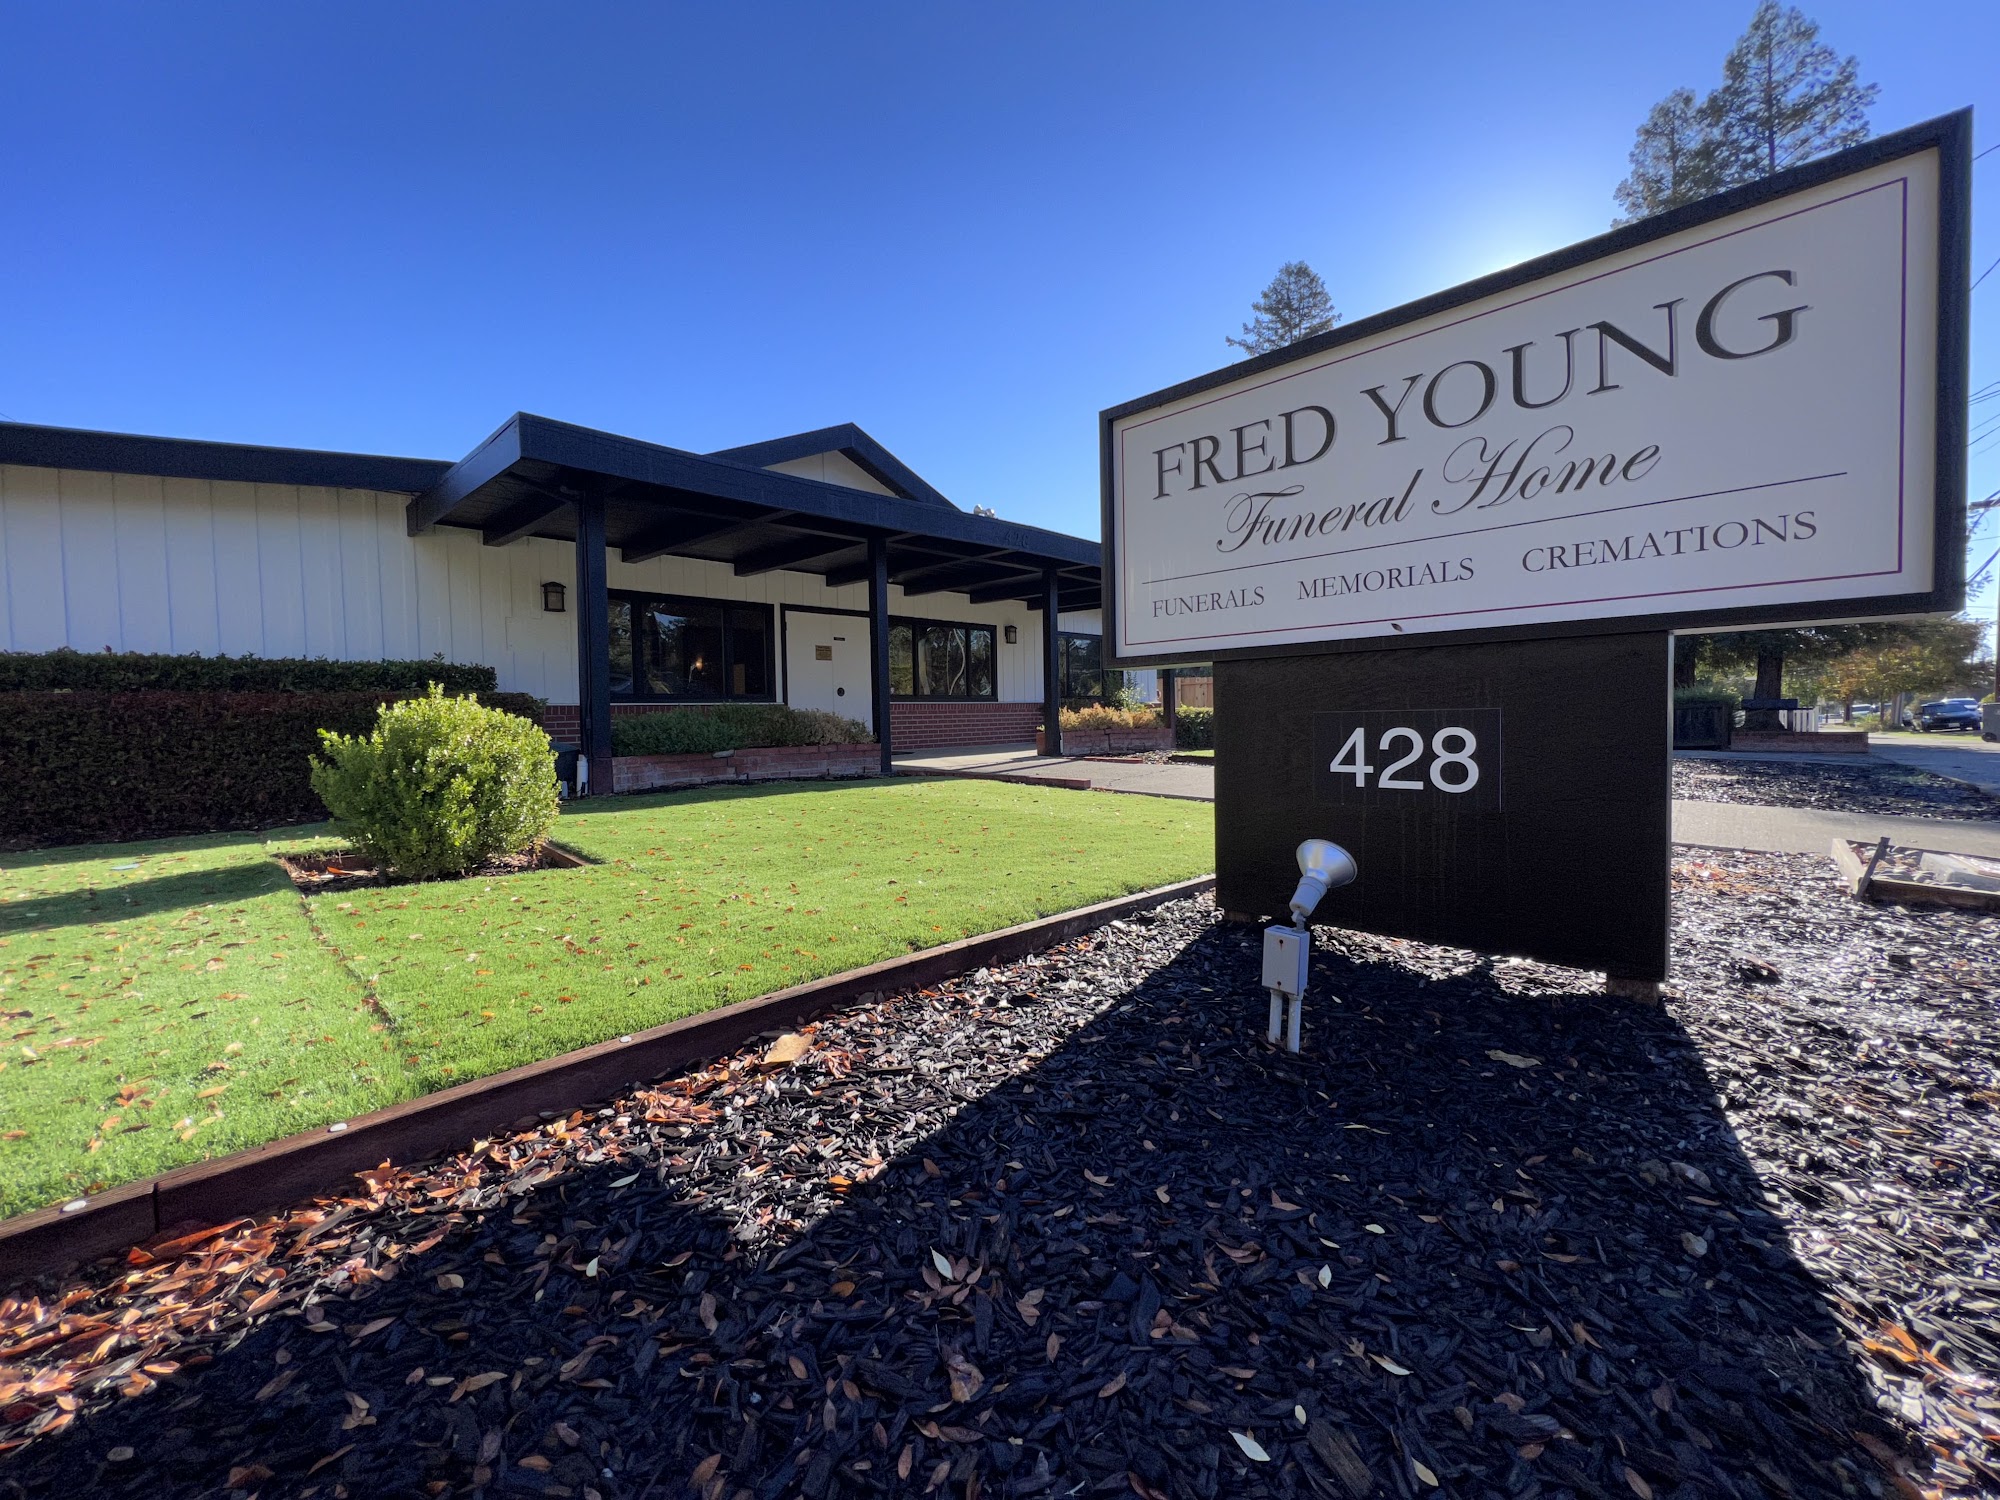 Fred Young Funeral Home | Cremation and Funeral Services 428 N Cloverdale Blvd, Cloverdale California 95425